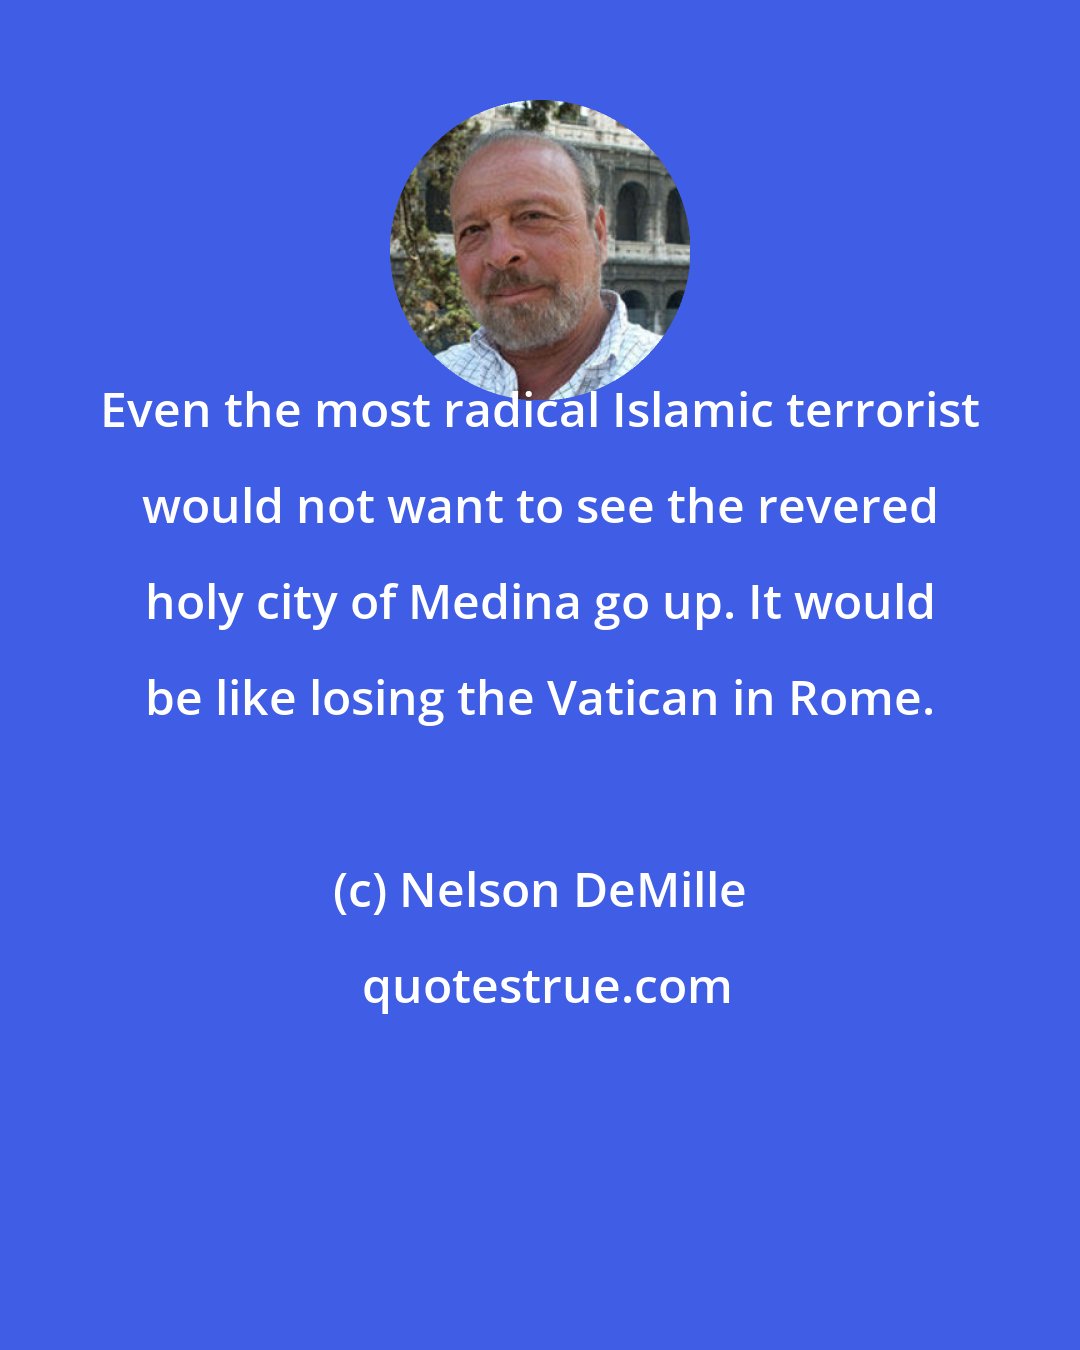 Nelson DeMille: Even the most radical Islamic terrorist would not want to see the revered holy city of Medina go up. It would be like losing the Vatican in Rome.